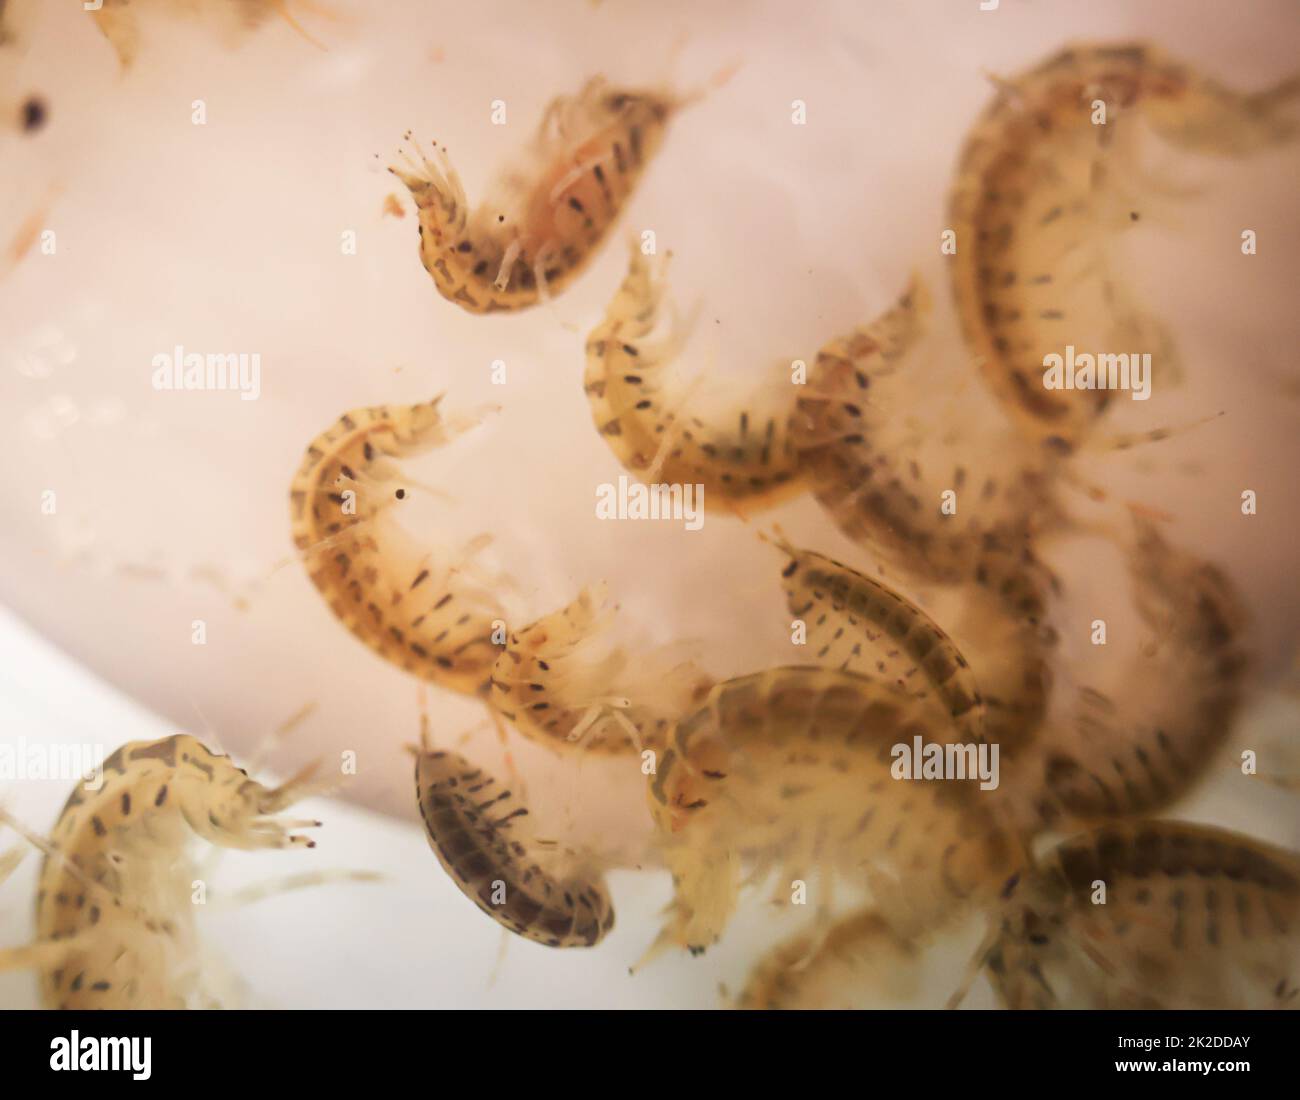 Many crayfish in a plastic container. Stock Photo